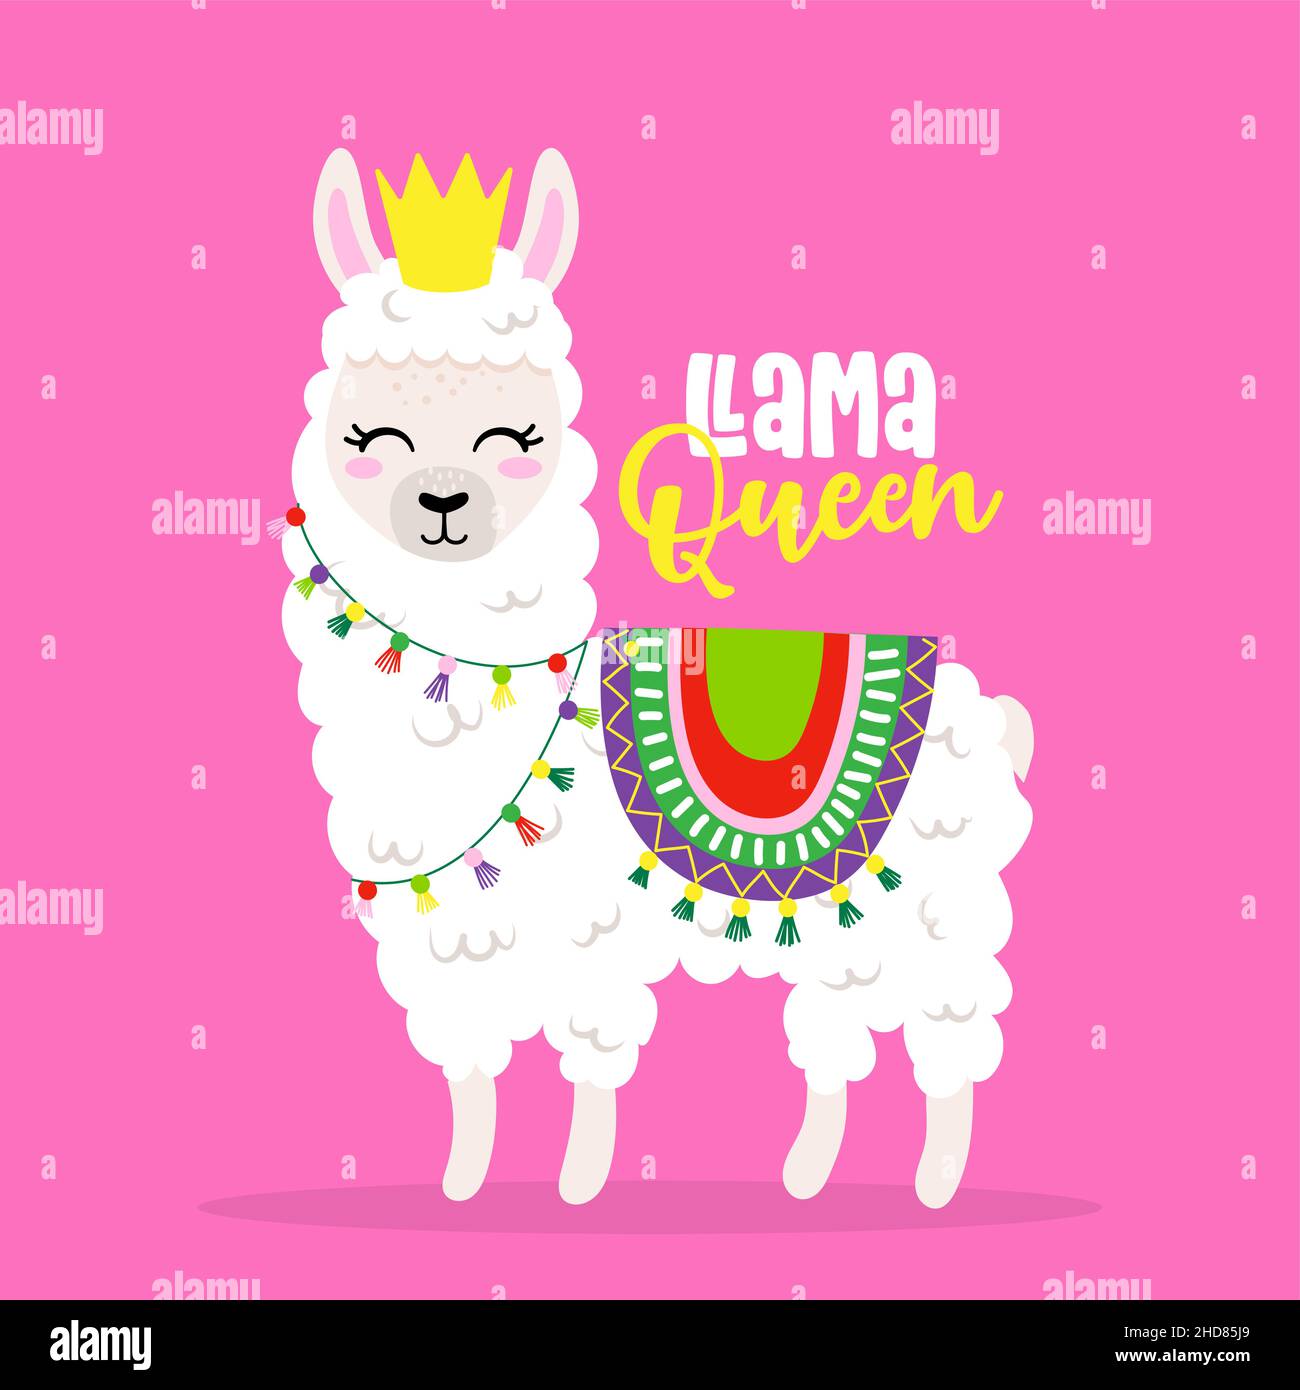 textile llama - & graphic illustration llama vector - Stock design. or on funny isola Queen Vector drawing. Llama t-shirt Art quotes poster Alamy and character Lettering Amazing Image